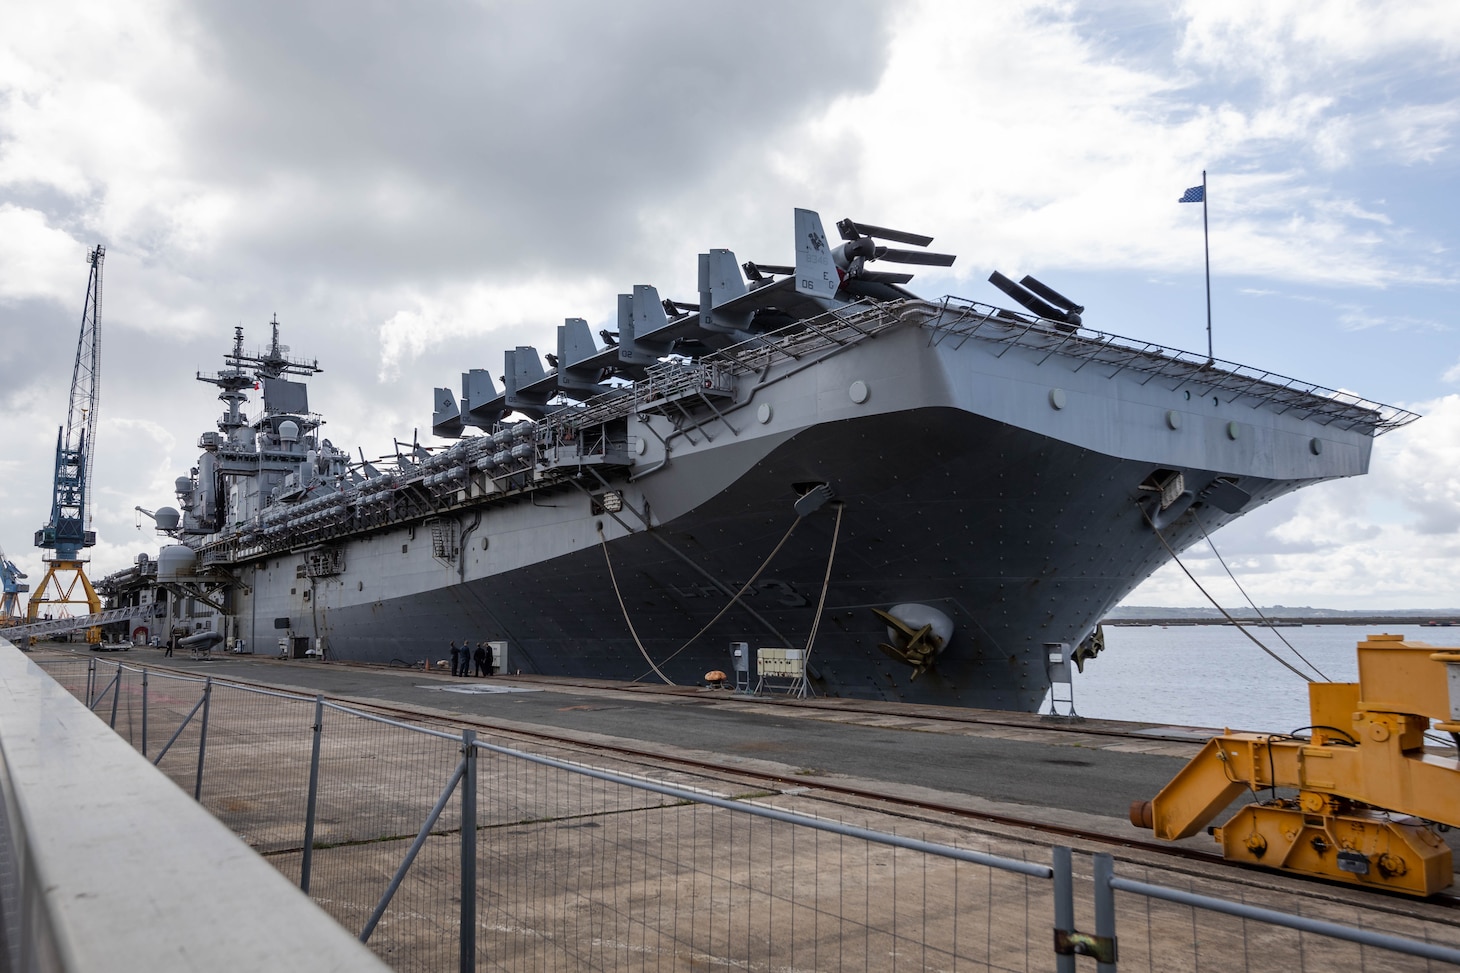 (June 30, 2022) The Wasp-class amphibious assault ship USS Kearsarge (LHD 3) ports in Brest, France for mid-deployment voyage repairs, June 30, 2022. The Kearsarge Amphibious Ready Group and embarked 22nd Marine Expeditionary Unit, under the command and control of Task Force 61/2, is on a scheduled deployment in the U.S. Naval Forces Europe area of operations, employed by U.S. Sixth Fleet to defend U.S., Allied and Partner interests.